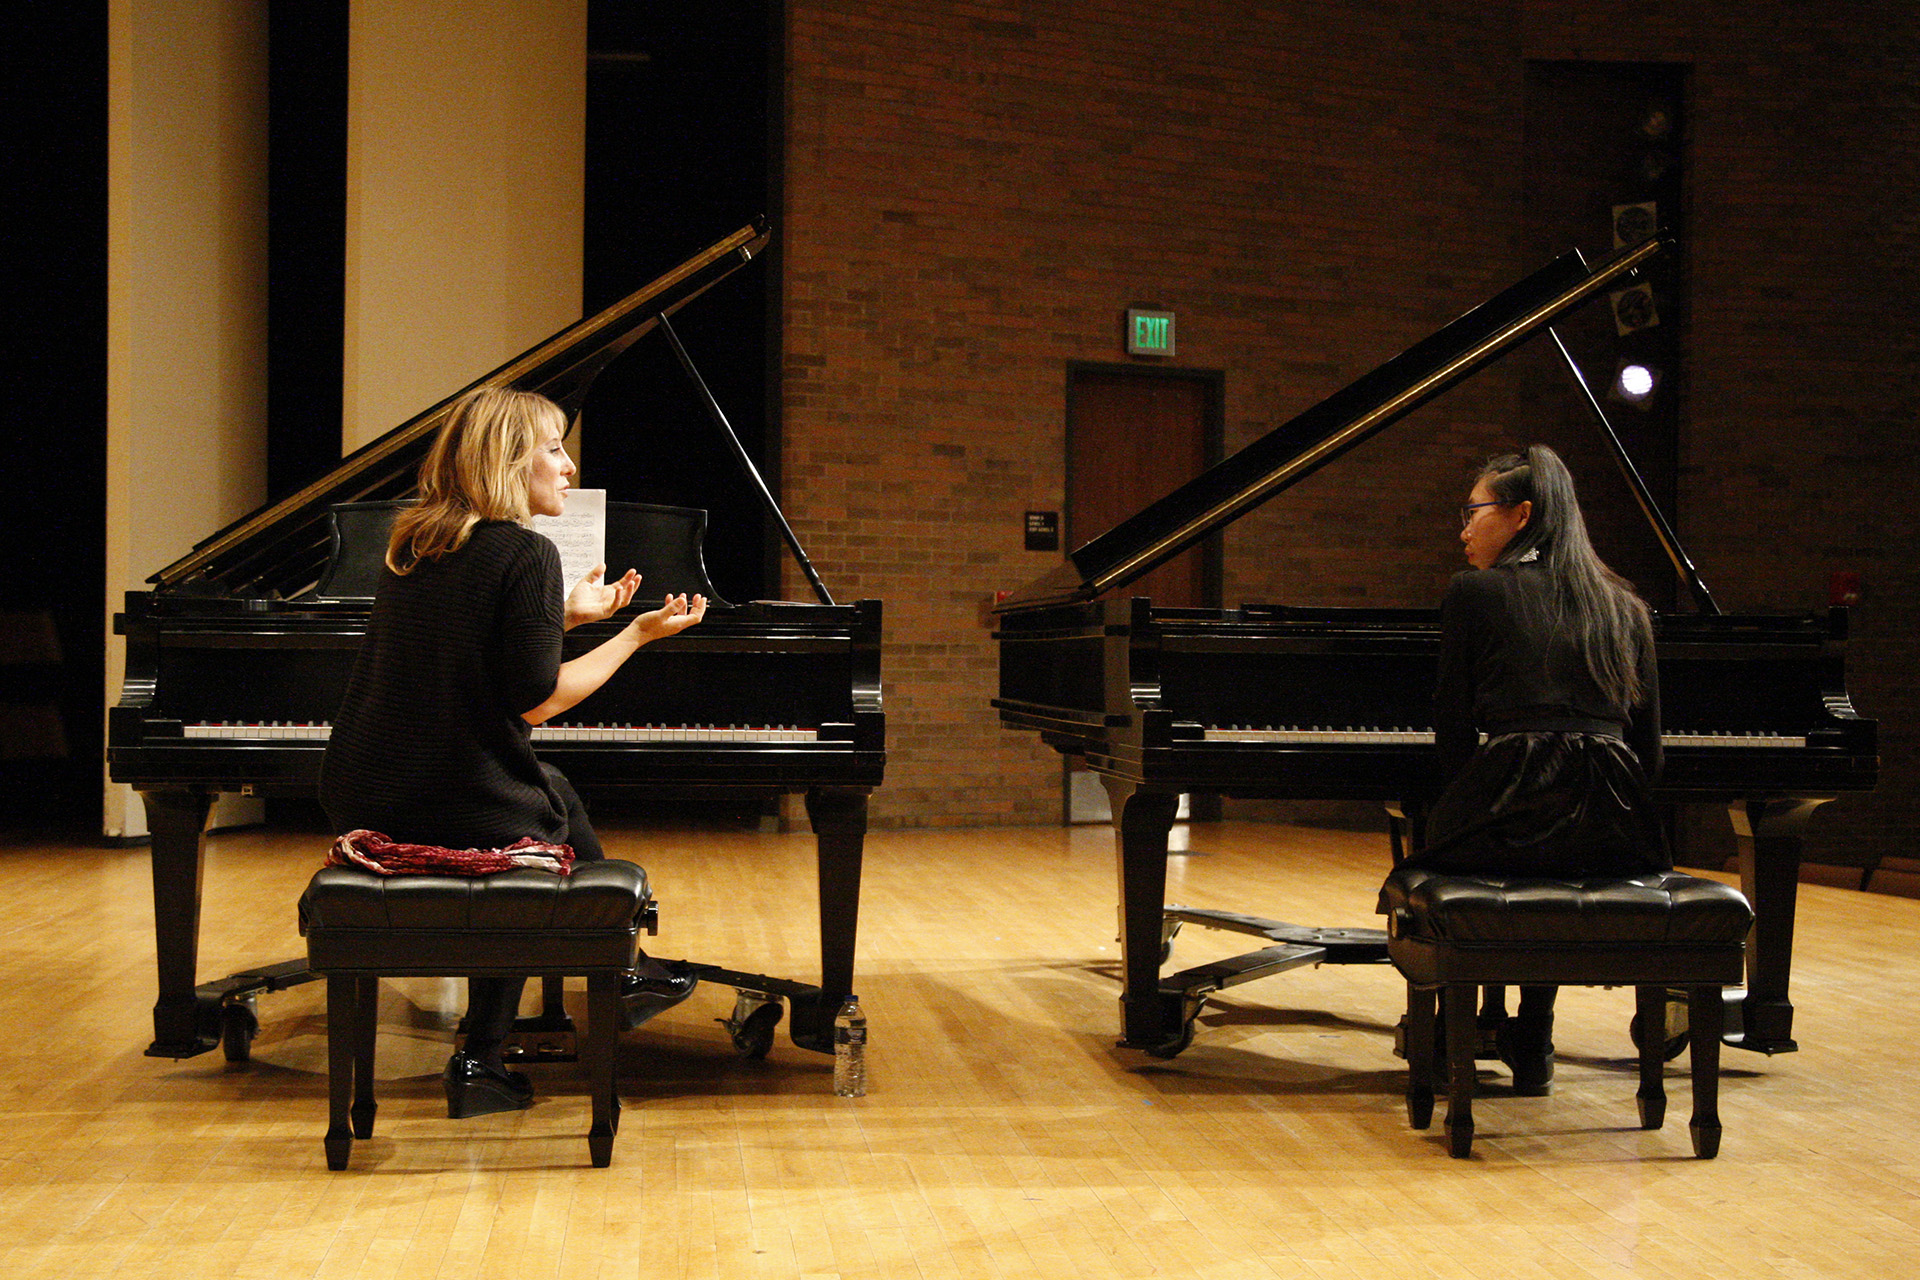 Two women talking while sitting at two separate pianos on stage